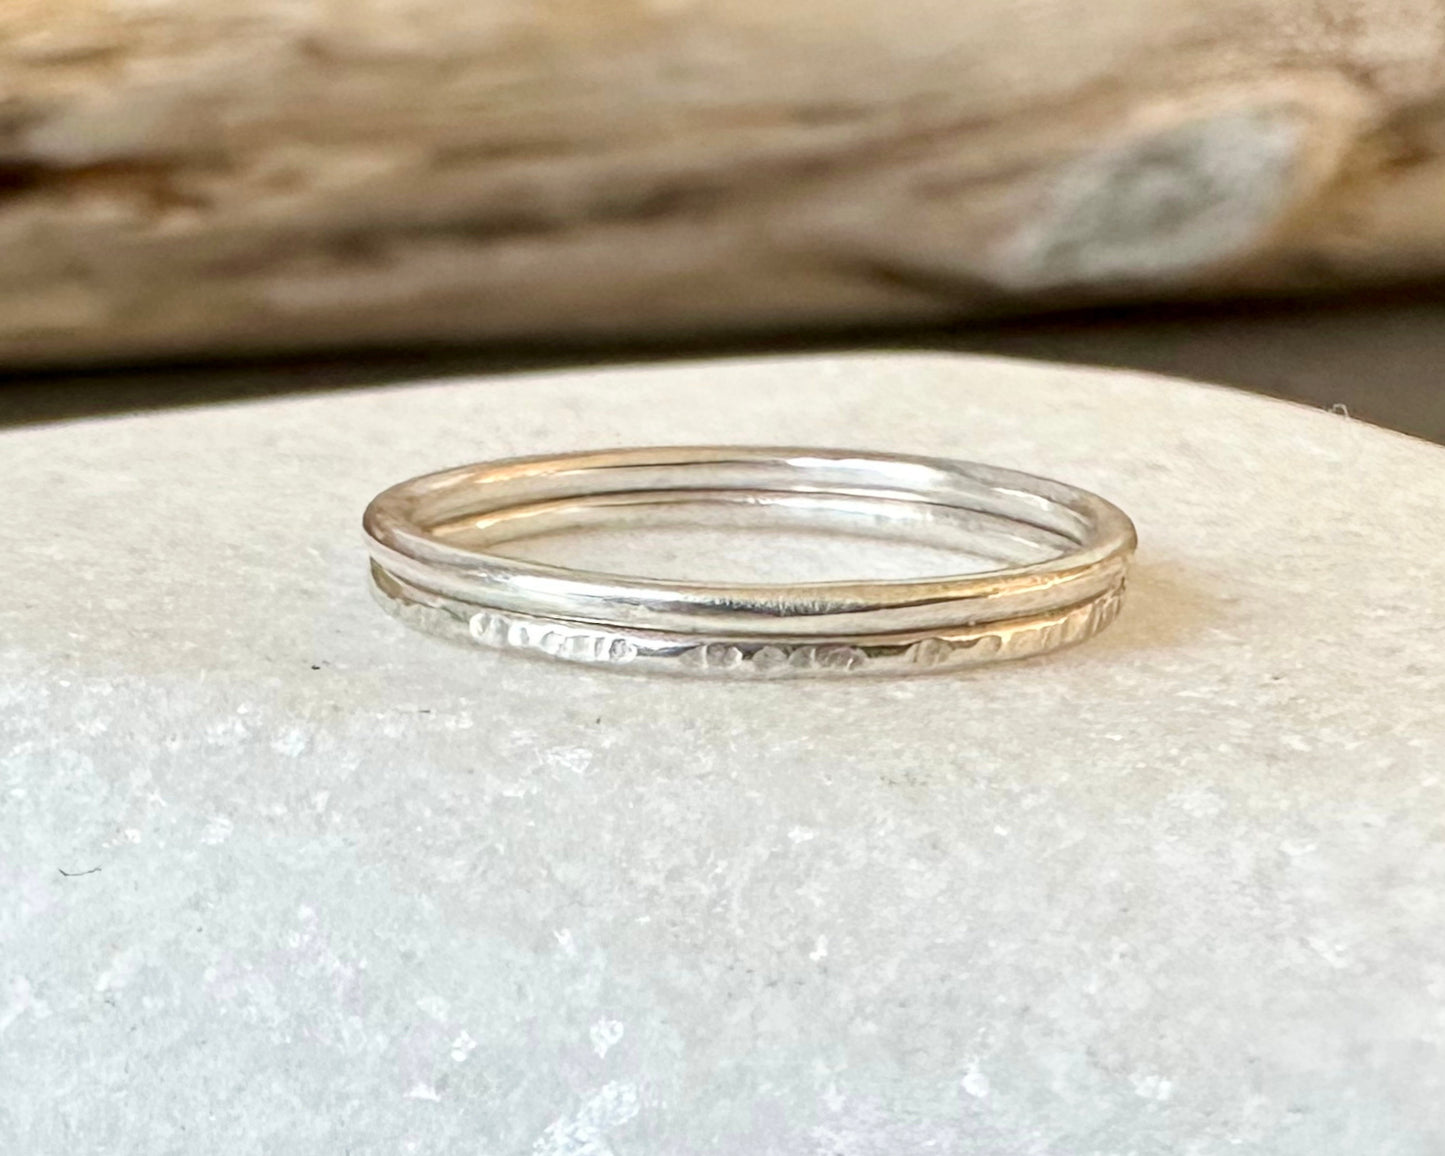 Set of Two Skinny 1.2mm 925 Sterling silver rings, Plain Ring, Hammered Ripple Pattern, Simple Minimalist Ring Band,